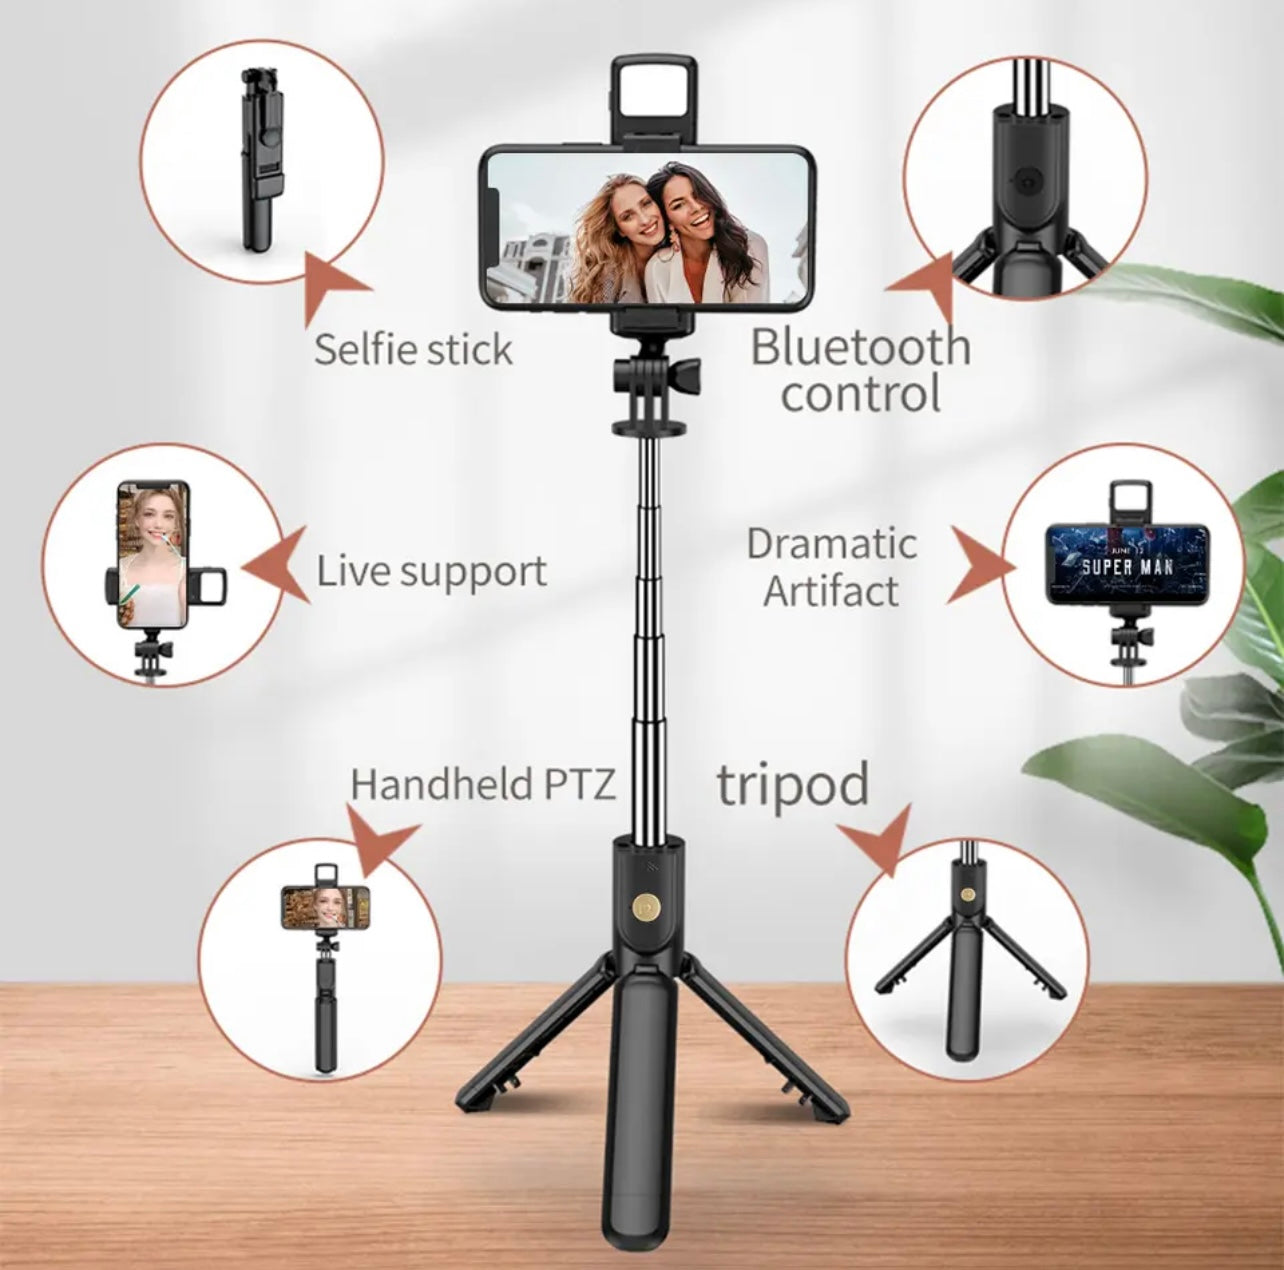 Portable 41 Inch Selfie Stick Phone Tripod with Wireless Remote Extendable Tripod Stand 360 Rotation Compatible with iPhone